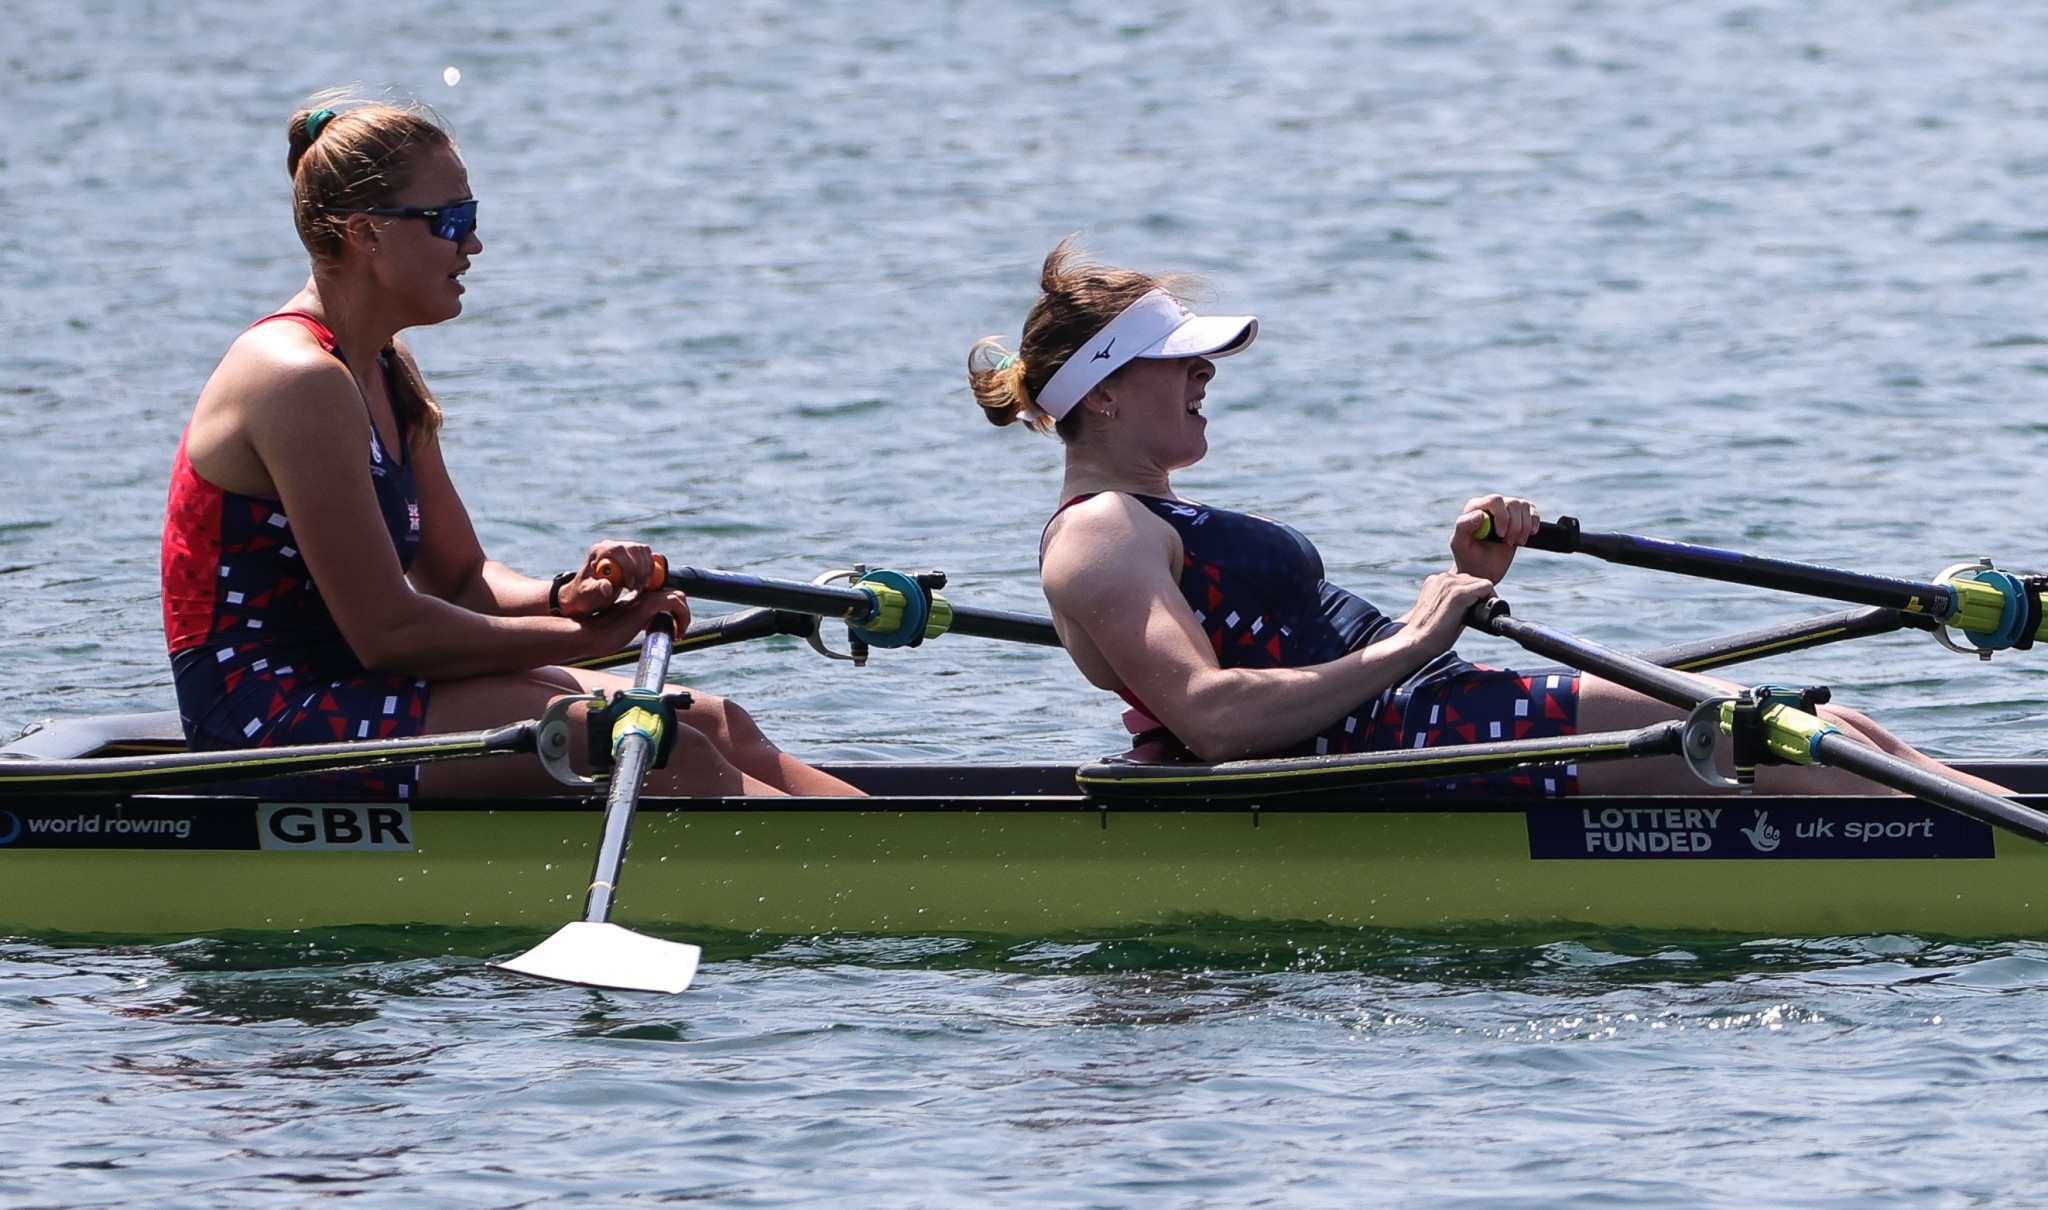 Lola Anderson, left, and Georgia Brayshaw, right, finished first in their women's double sculls heat ©Getty Images